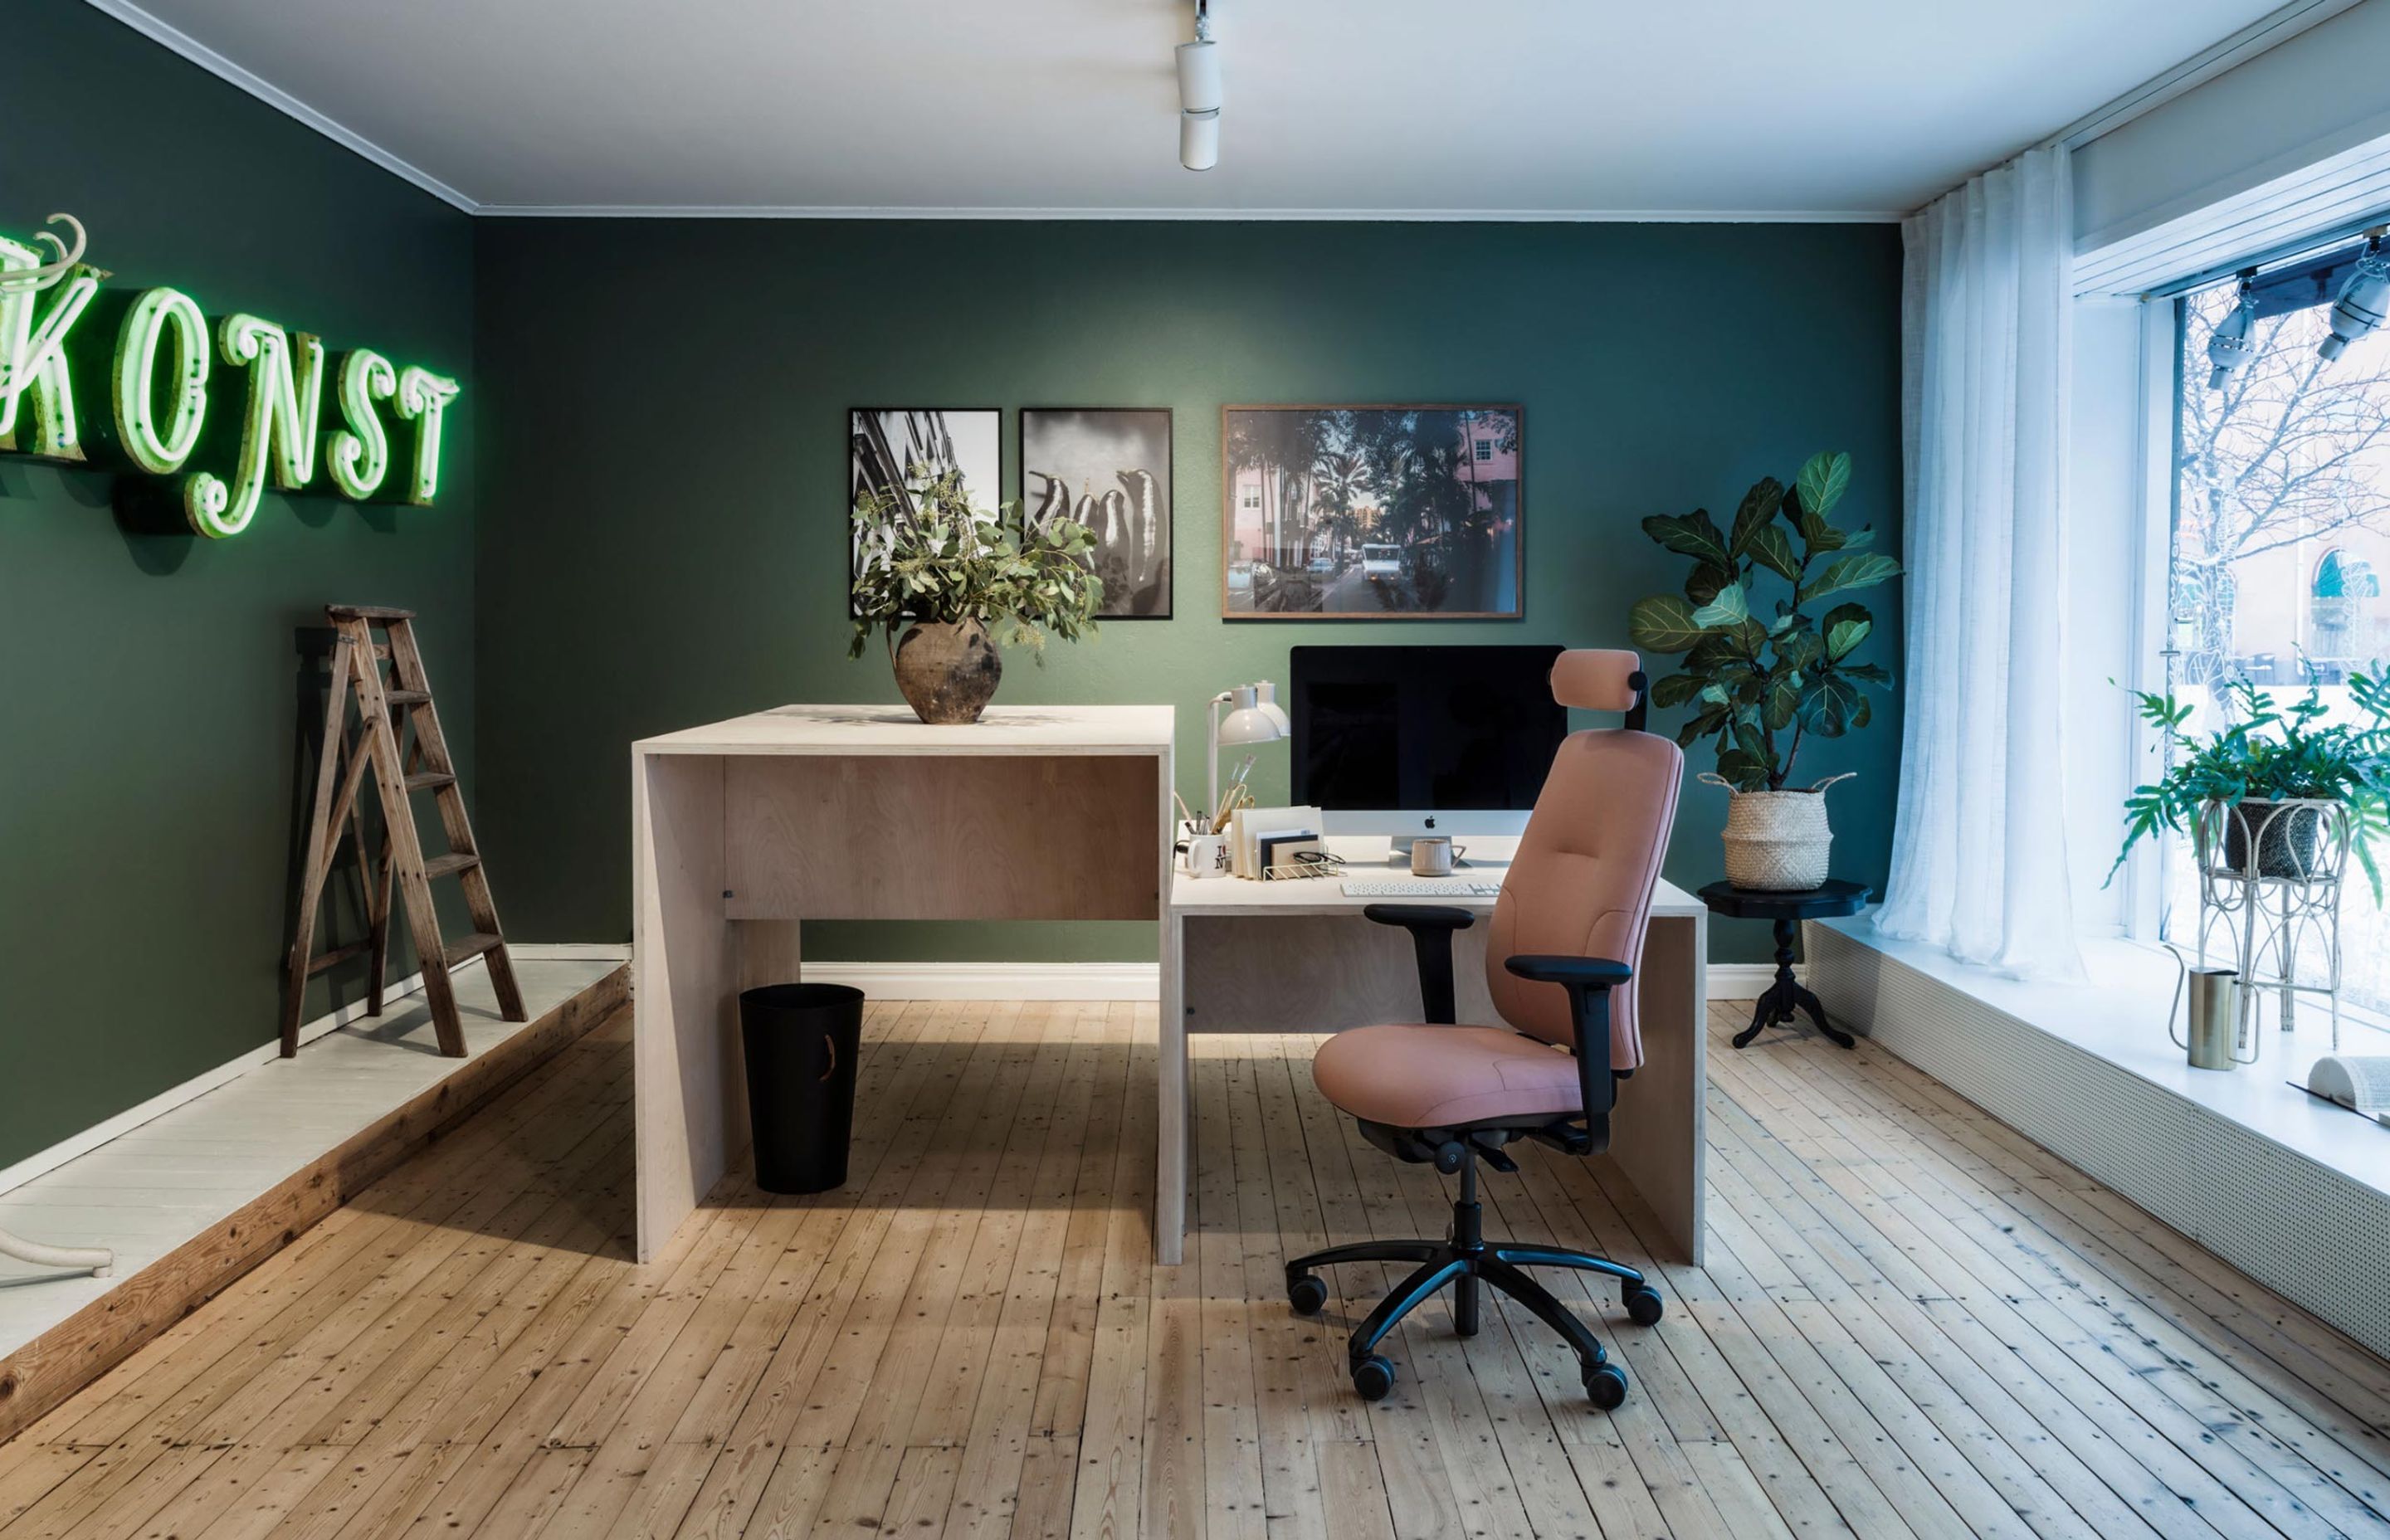 Or how about a funky solo office with vibrant green walls and neon sign, featuring RH New Logic chair